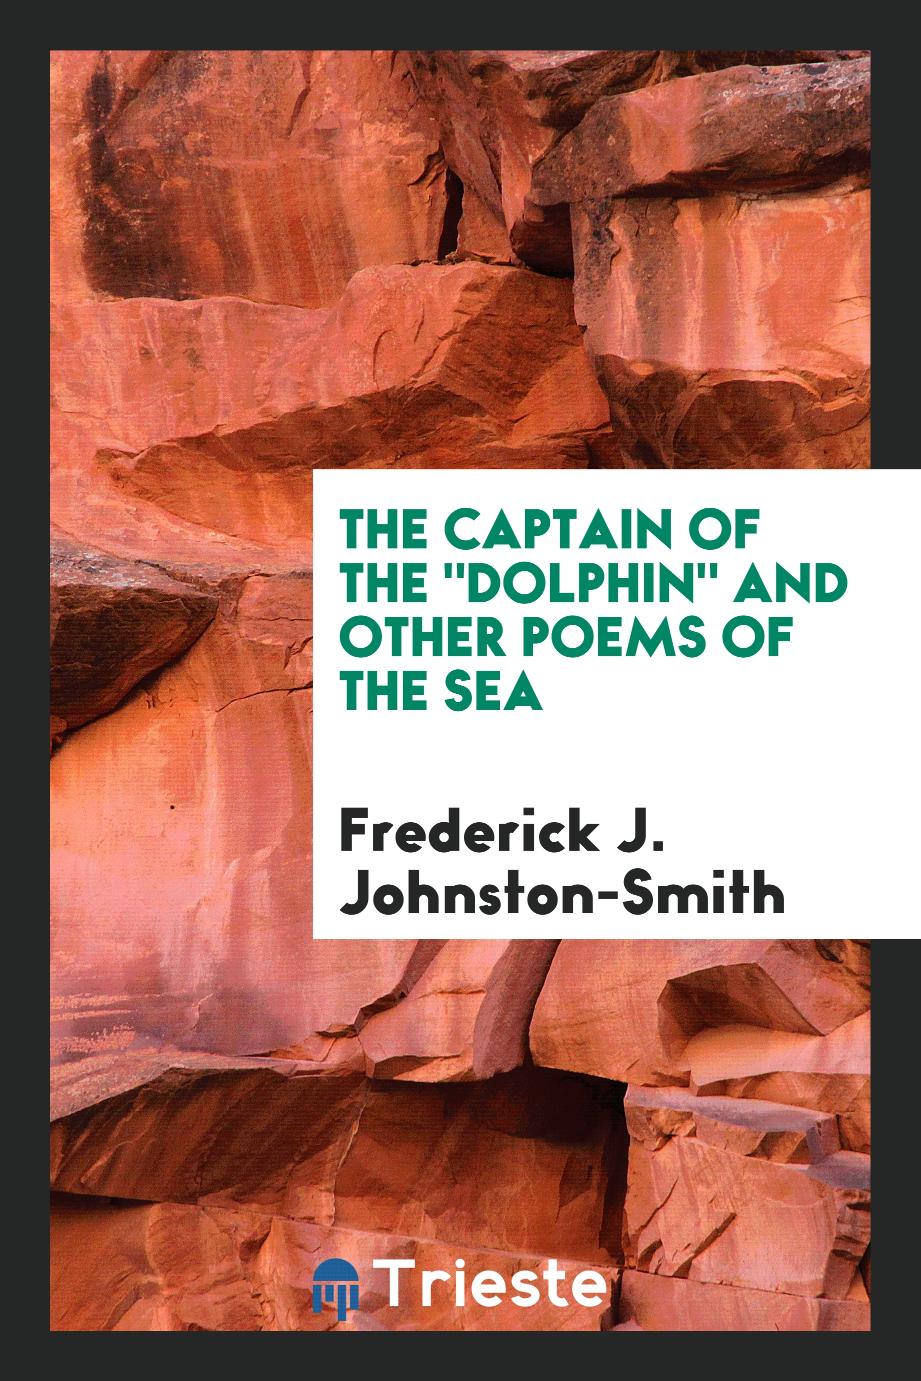 The captain of the "Dolphin" and other poems of the sea